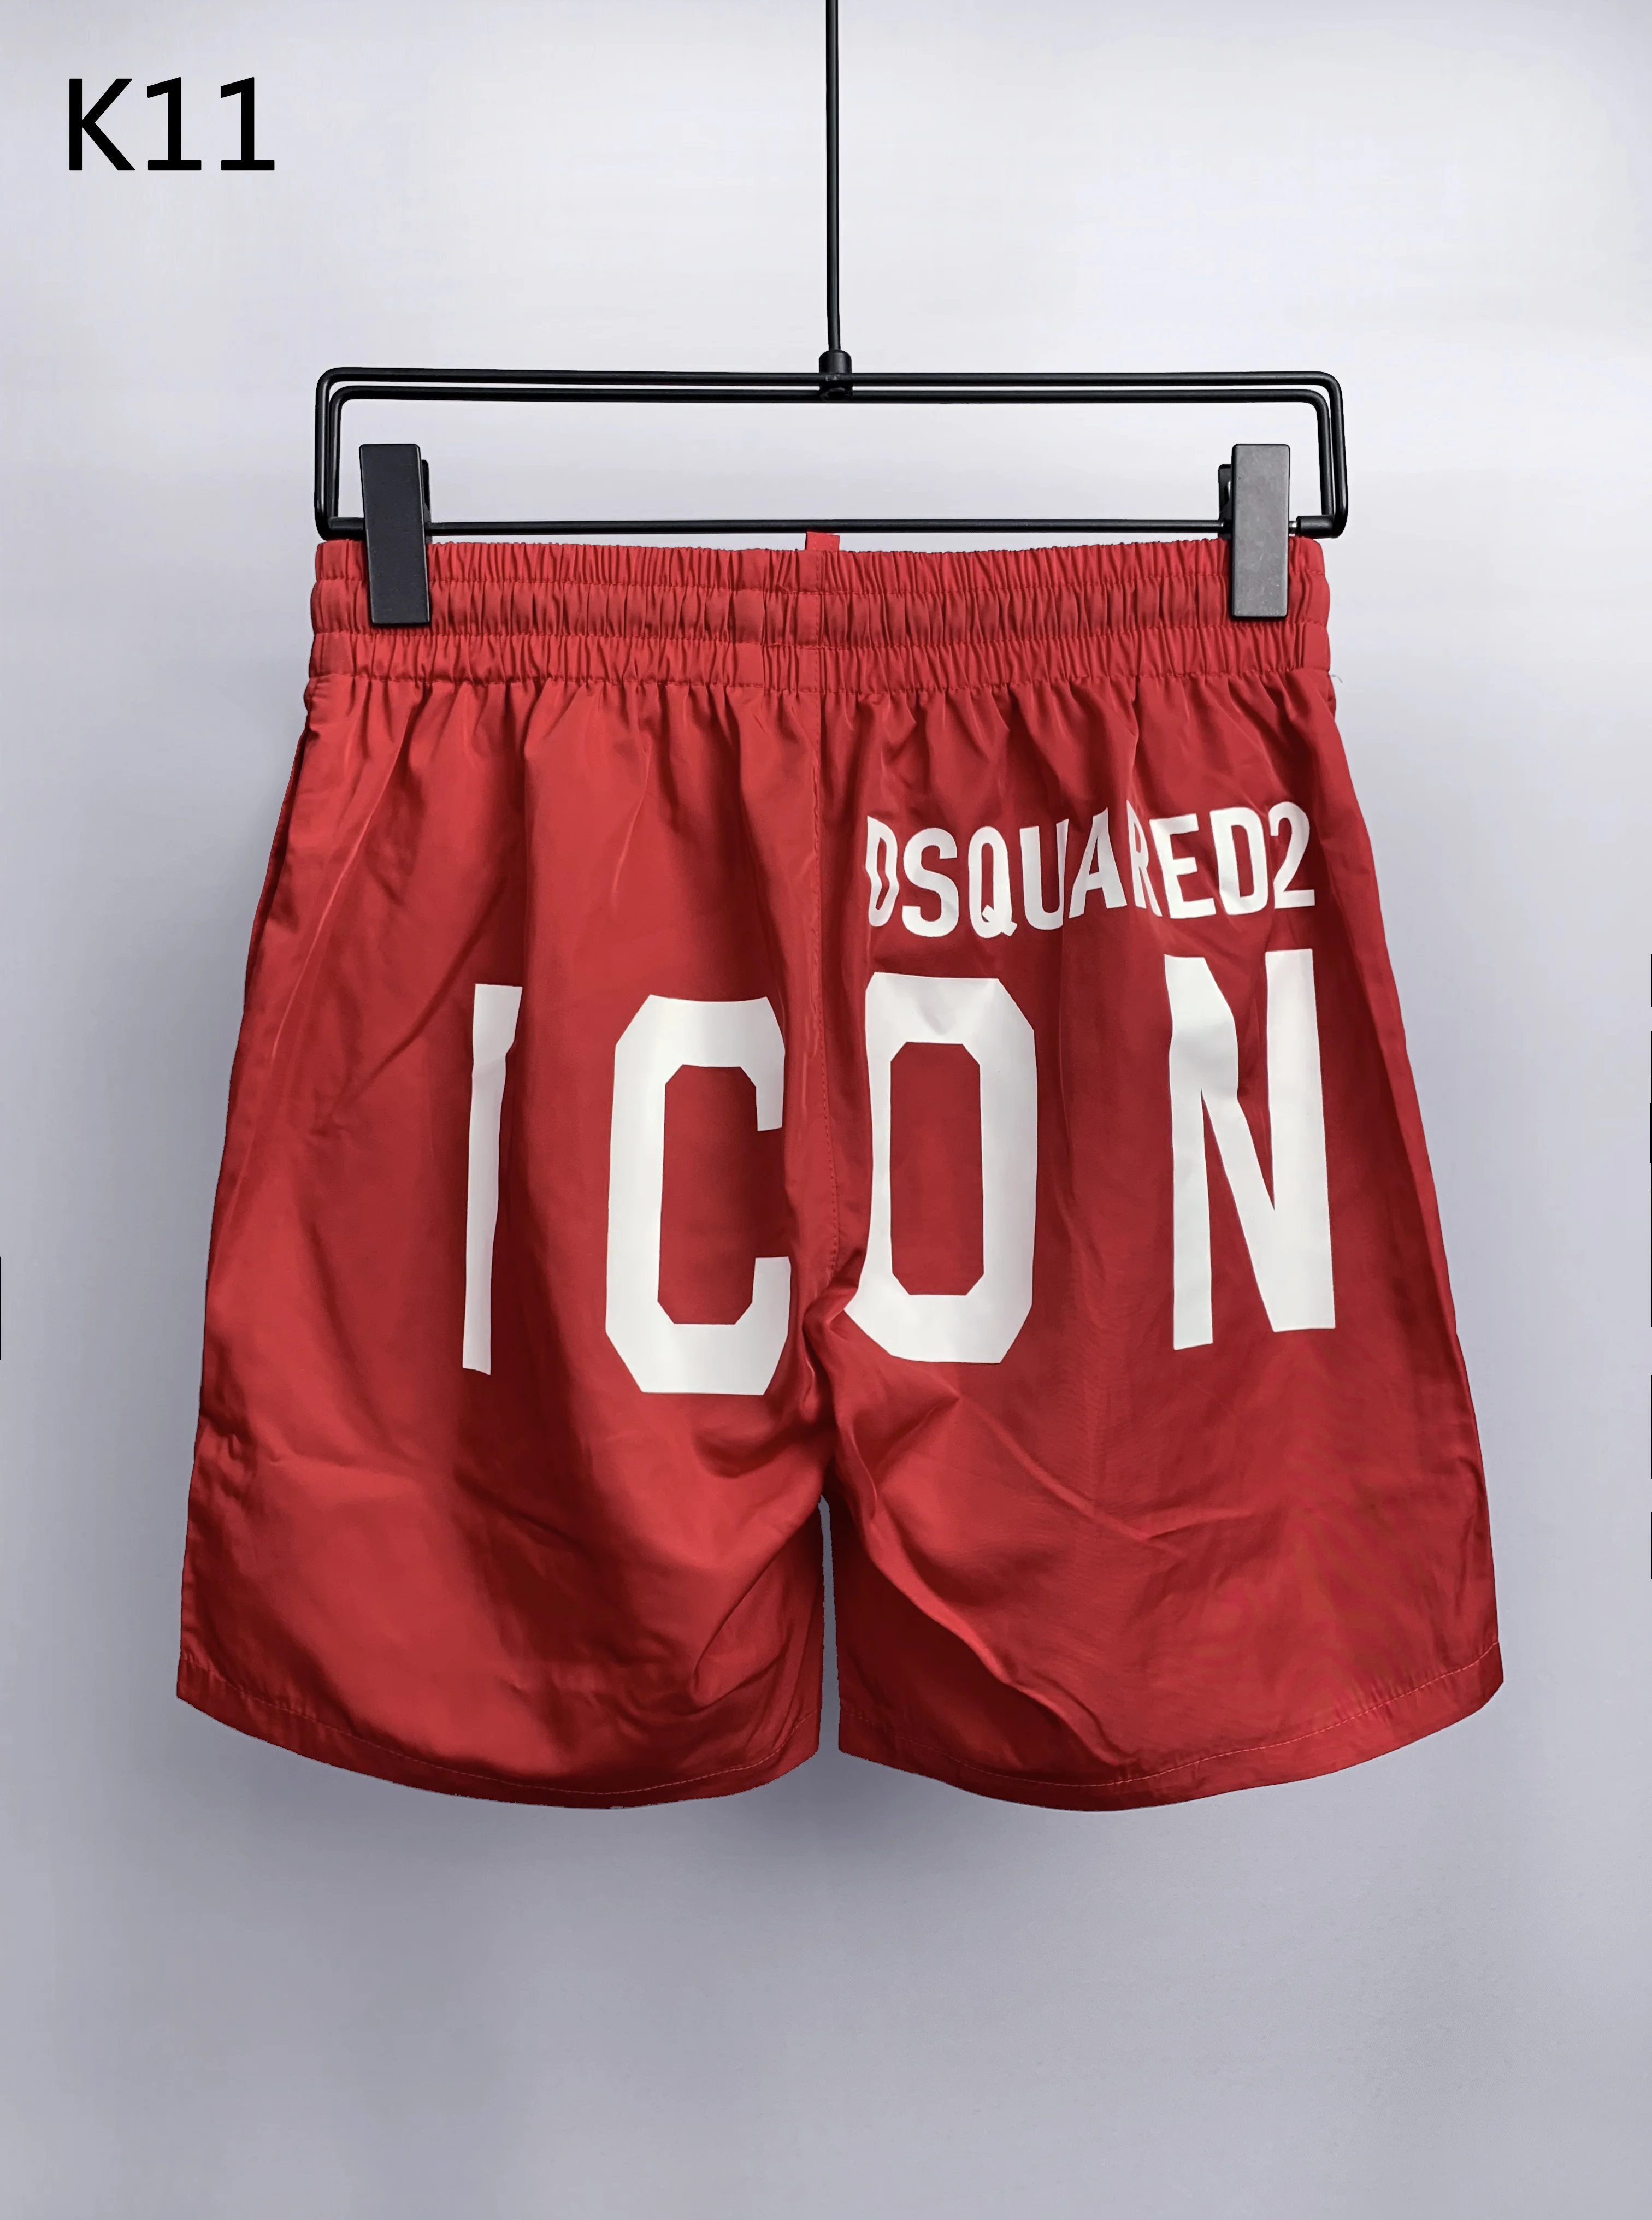 

ICON Top Quality Dsquared2 Swimsuit Shorts Swimwear Men 2023 Quick-drying Men Swimming Briefs Beach Shorts Trunks M-3XL